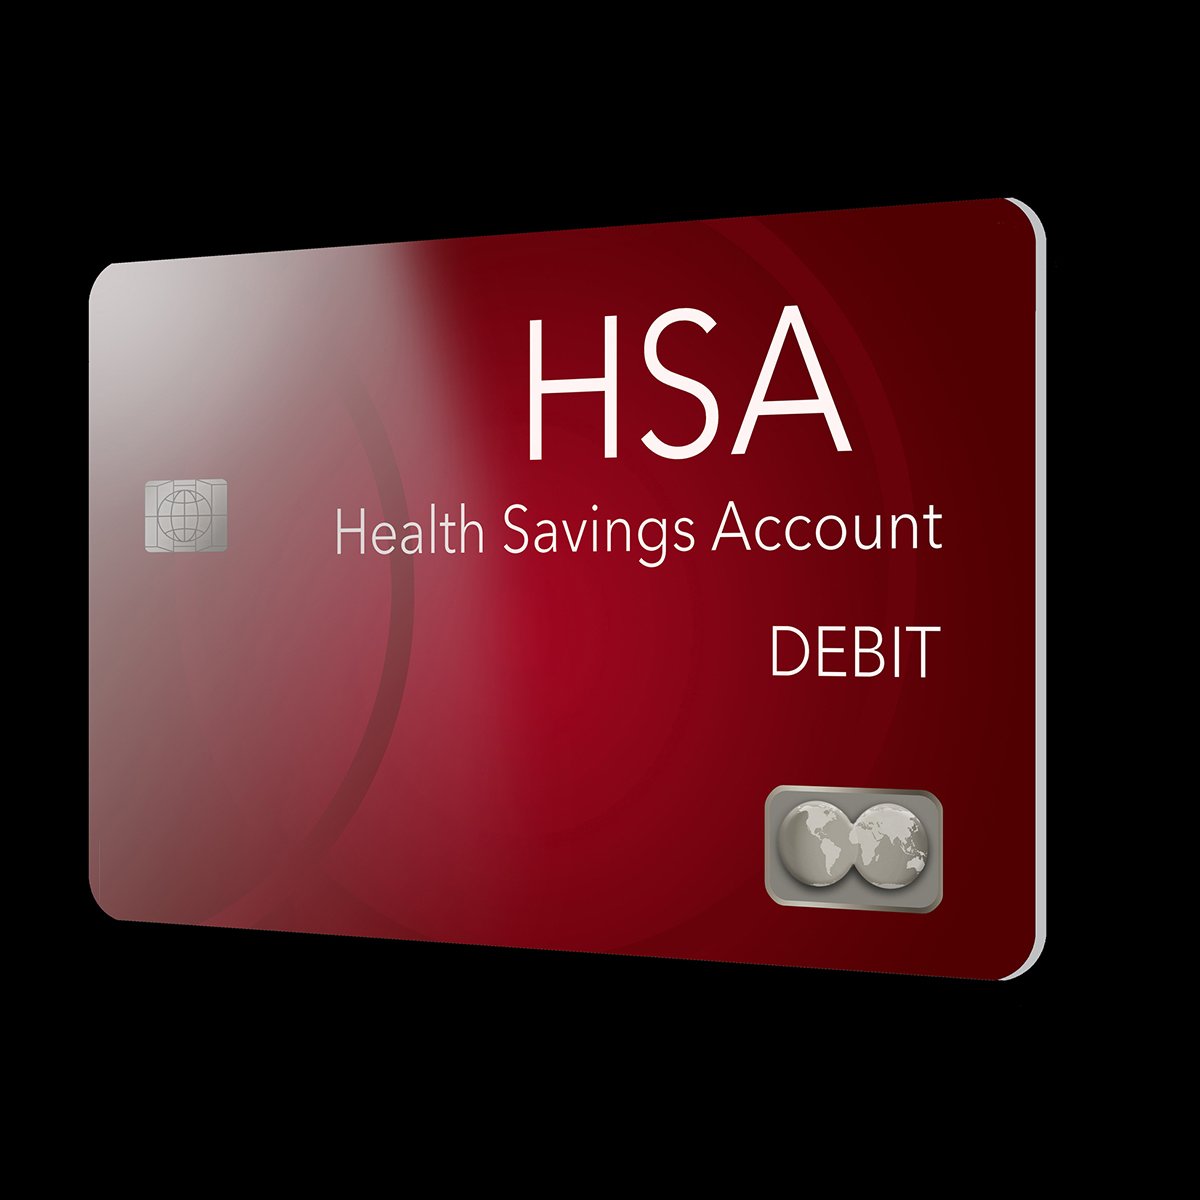 6 Eligible HSA Expenses You May Have Overlooked